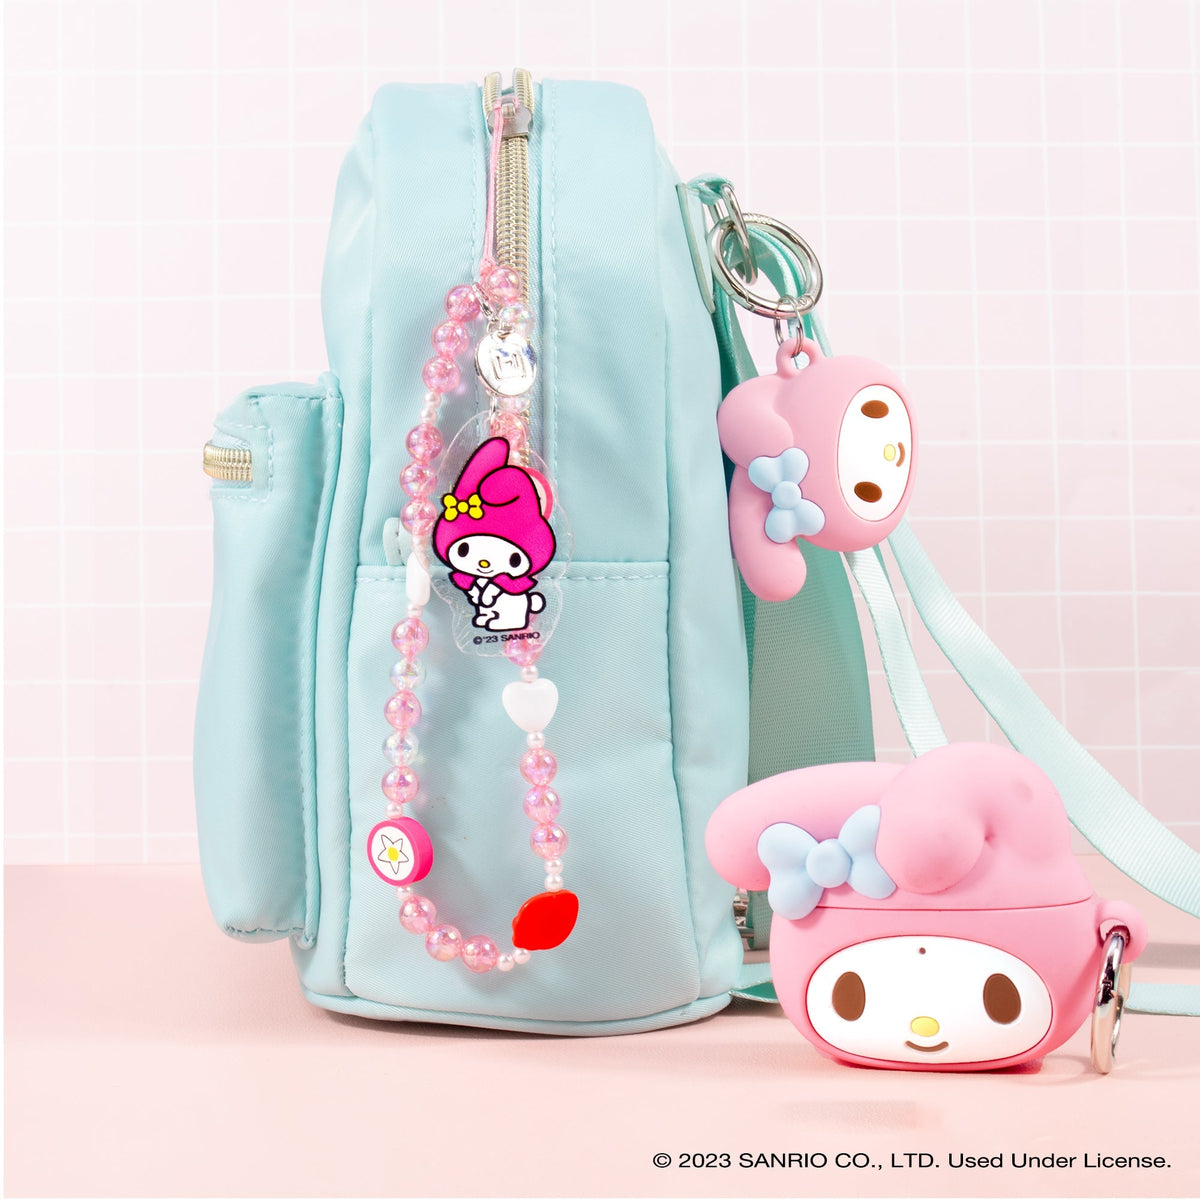 My Melody Beaded Charm Mobile Phone Wrist Strap Accessory HAMEE   